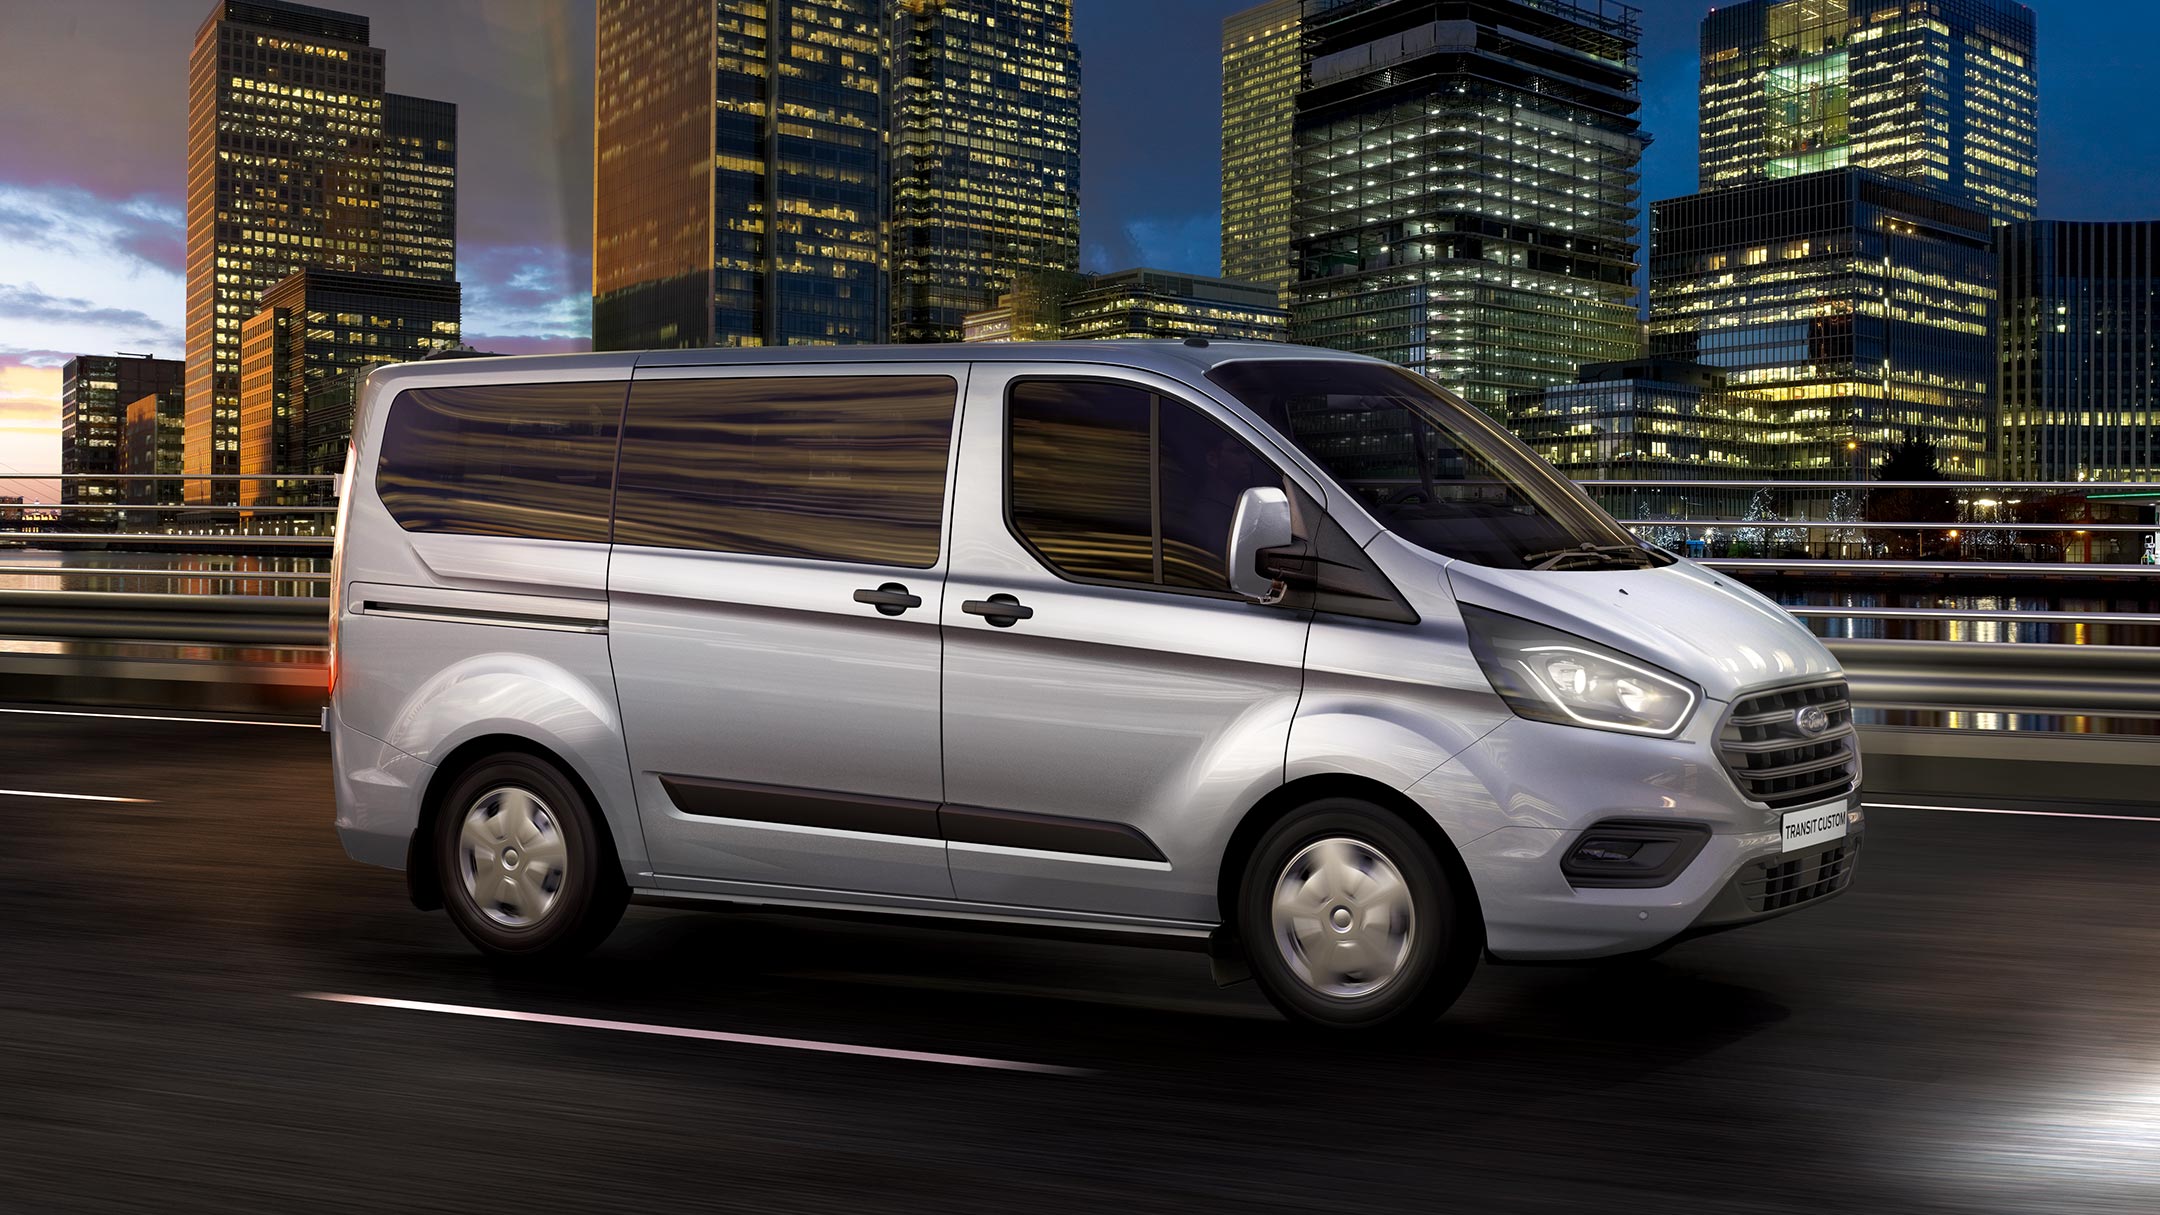 Ford Transit Custom driving in city at night